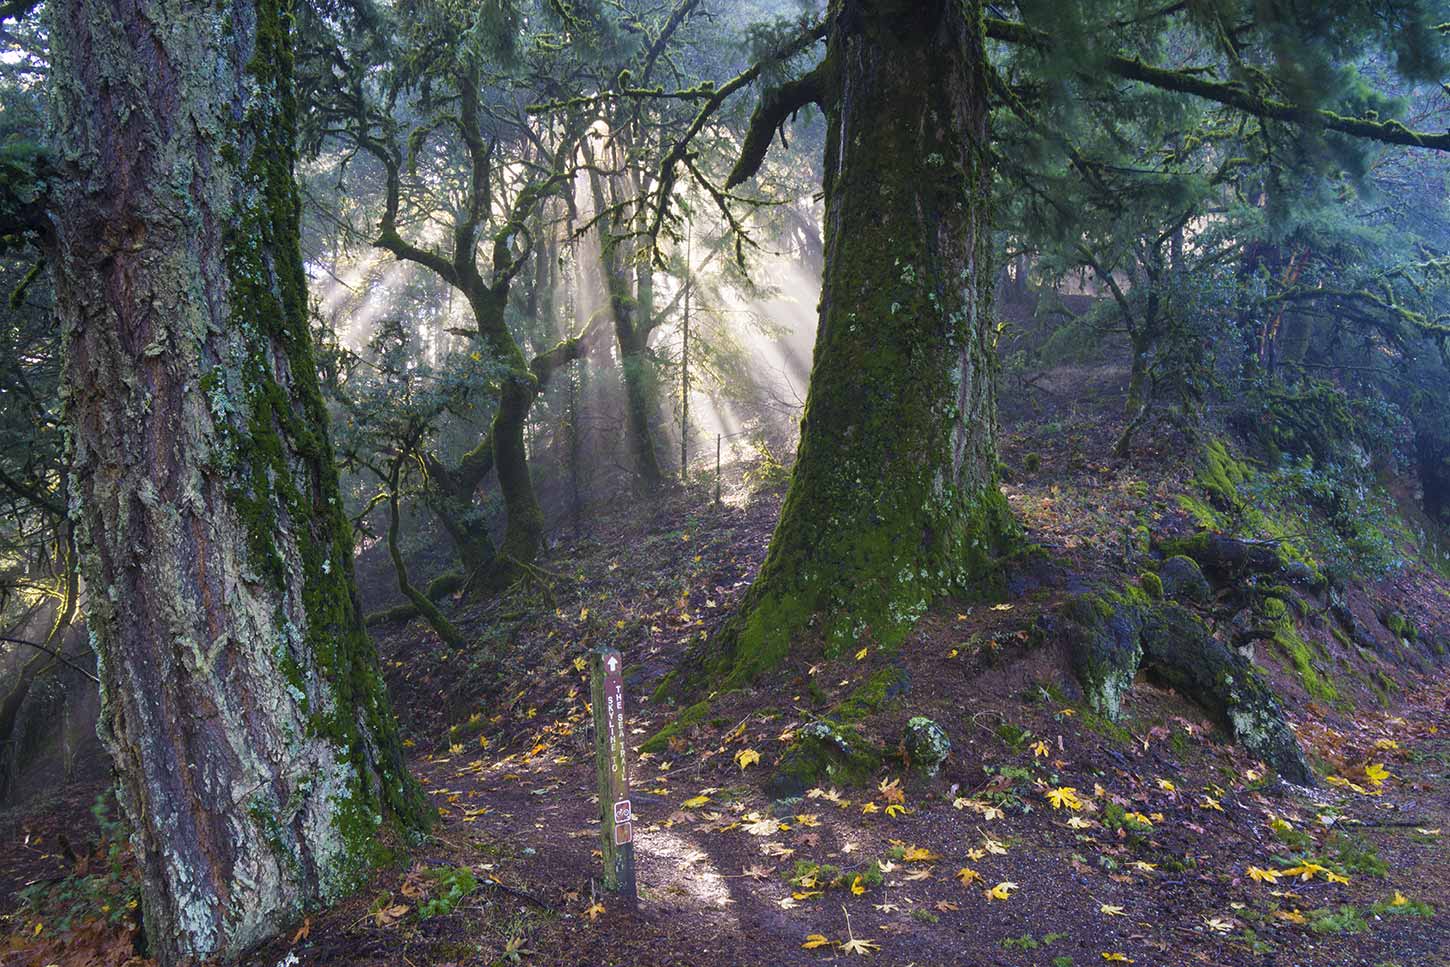 The Skyline-to-the-Sea Trail at the first crossing of Big Basin Way